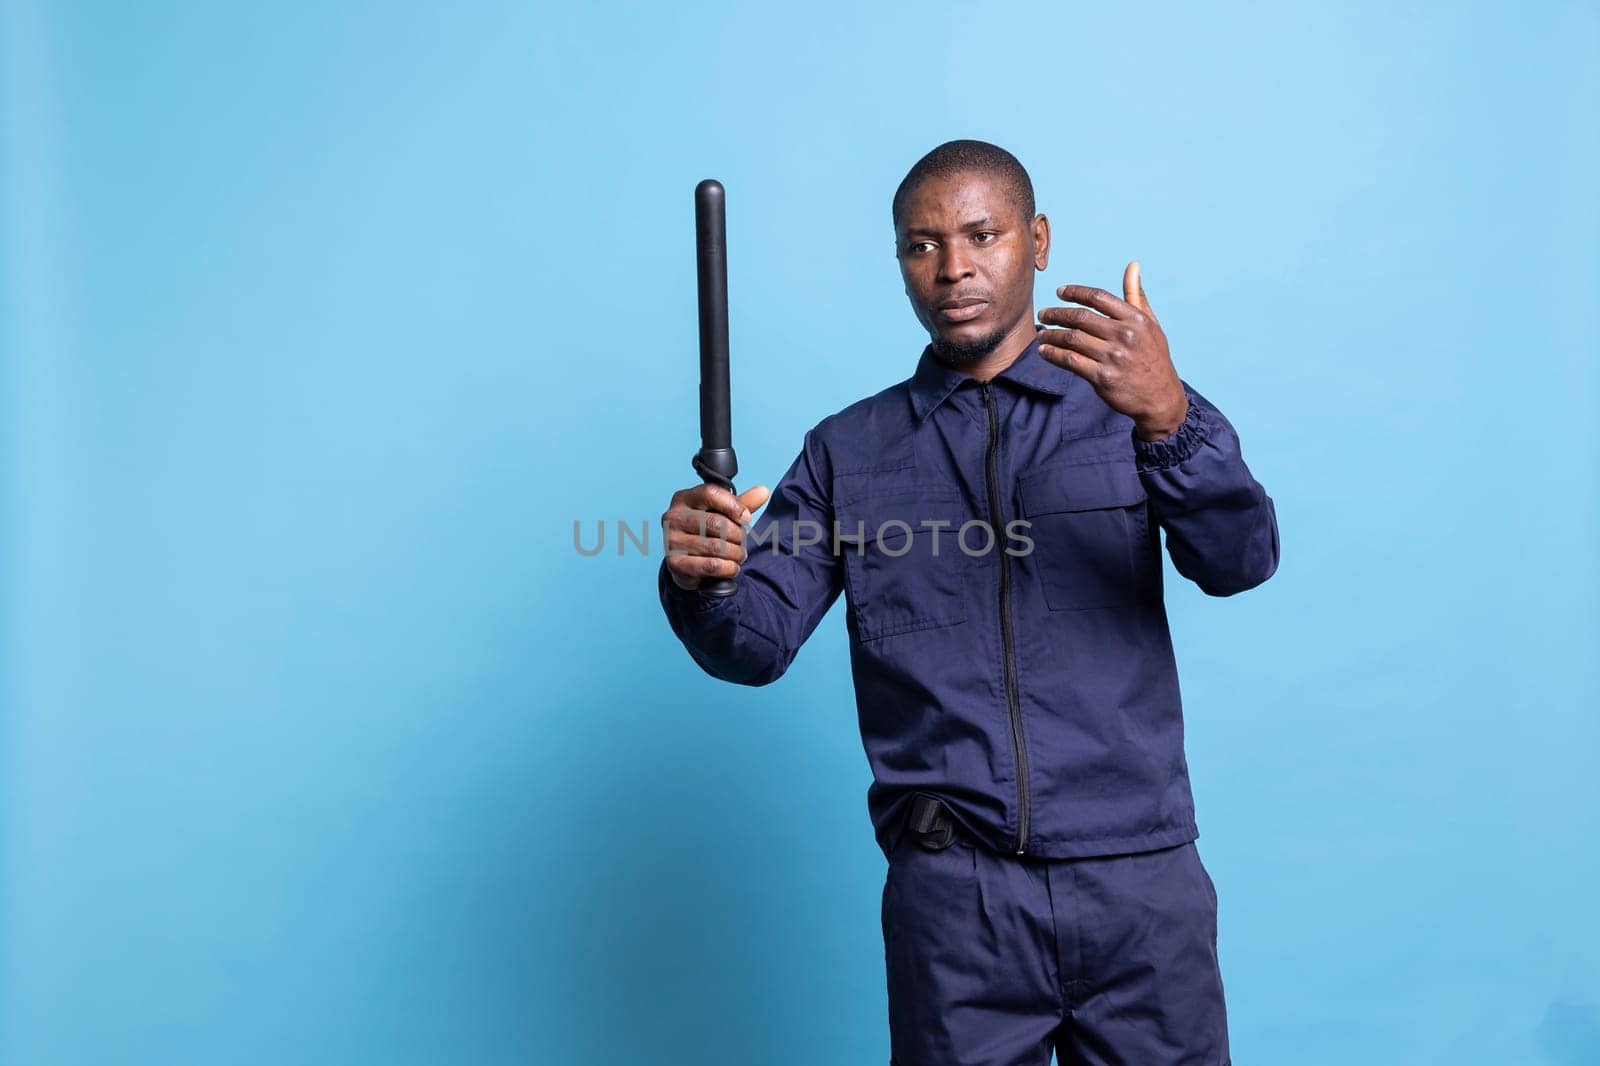 Security agent holding a baton and asking people to come over, calling persons to approach him against blue background. Skilled trained bodyguard working on public safety, job duty.